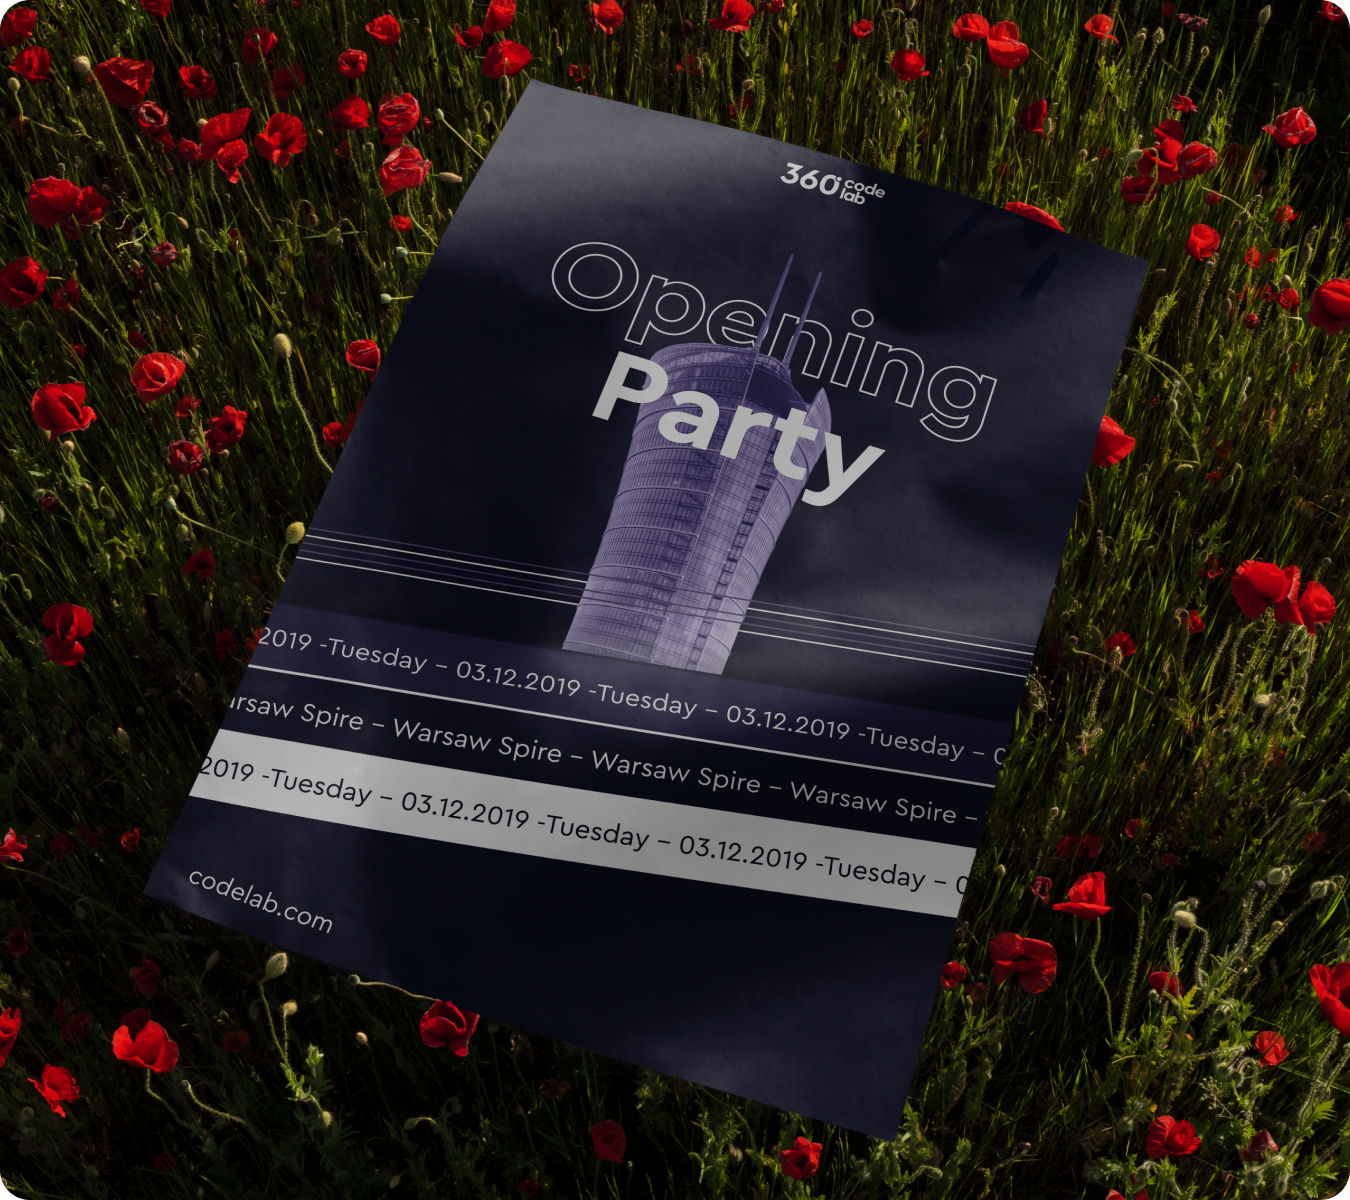 360 Codelab opening party poster